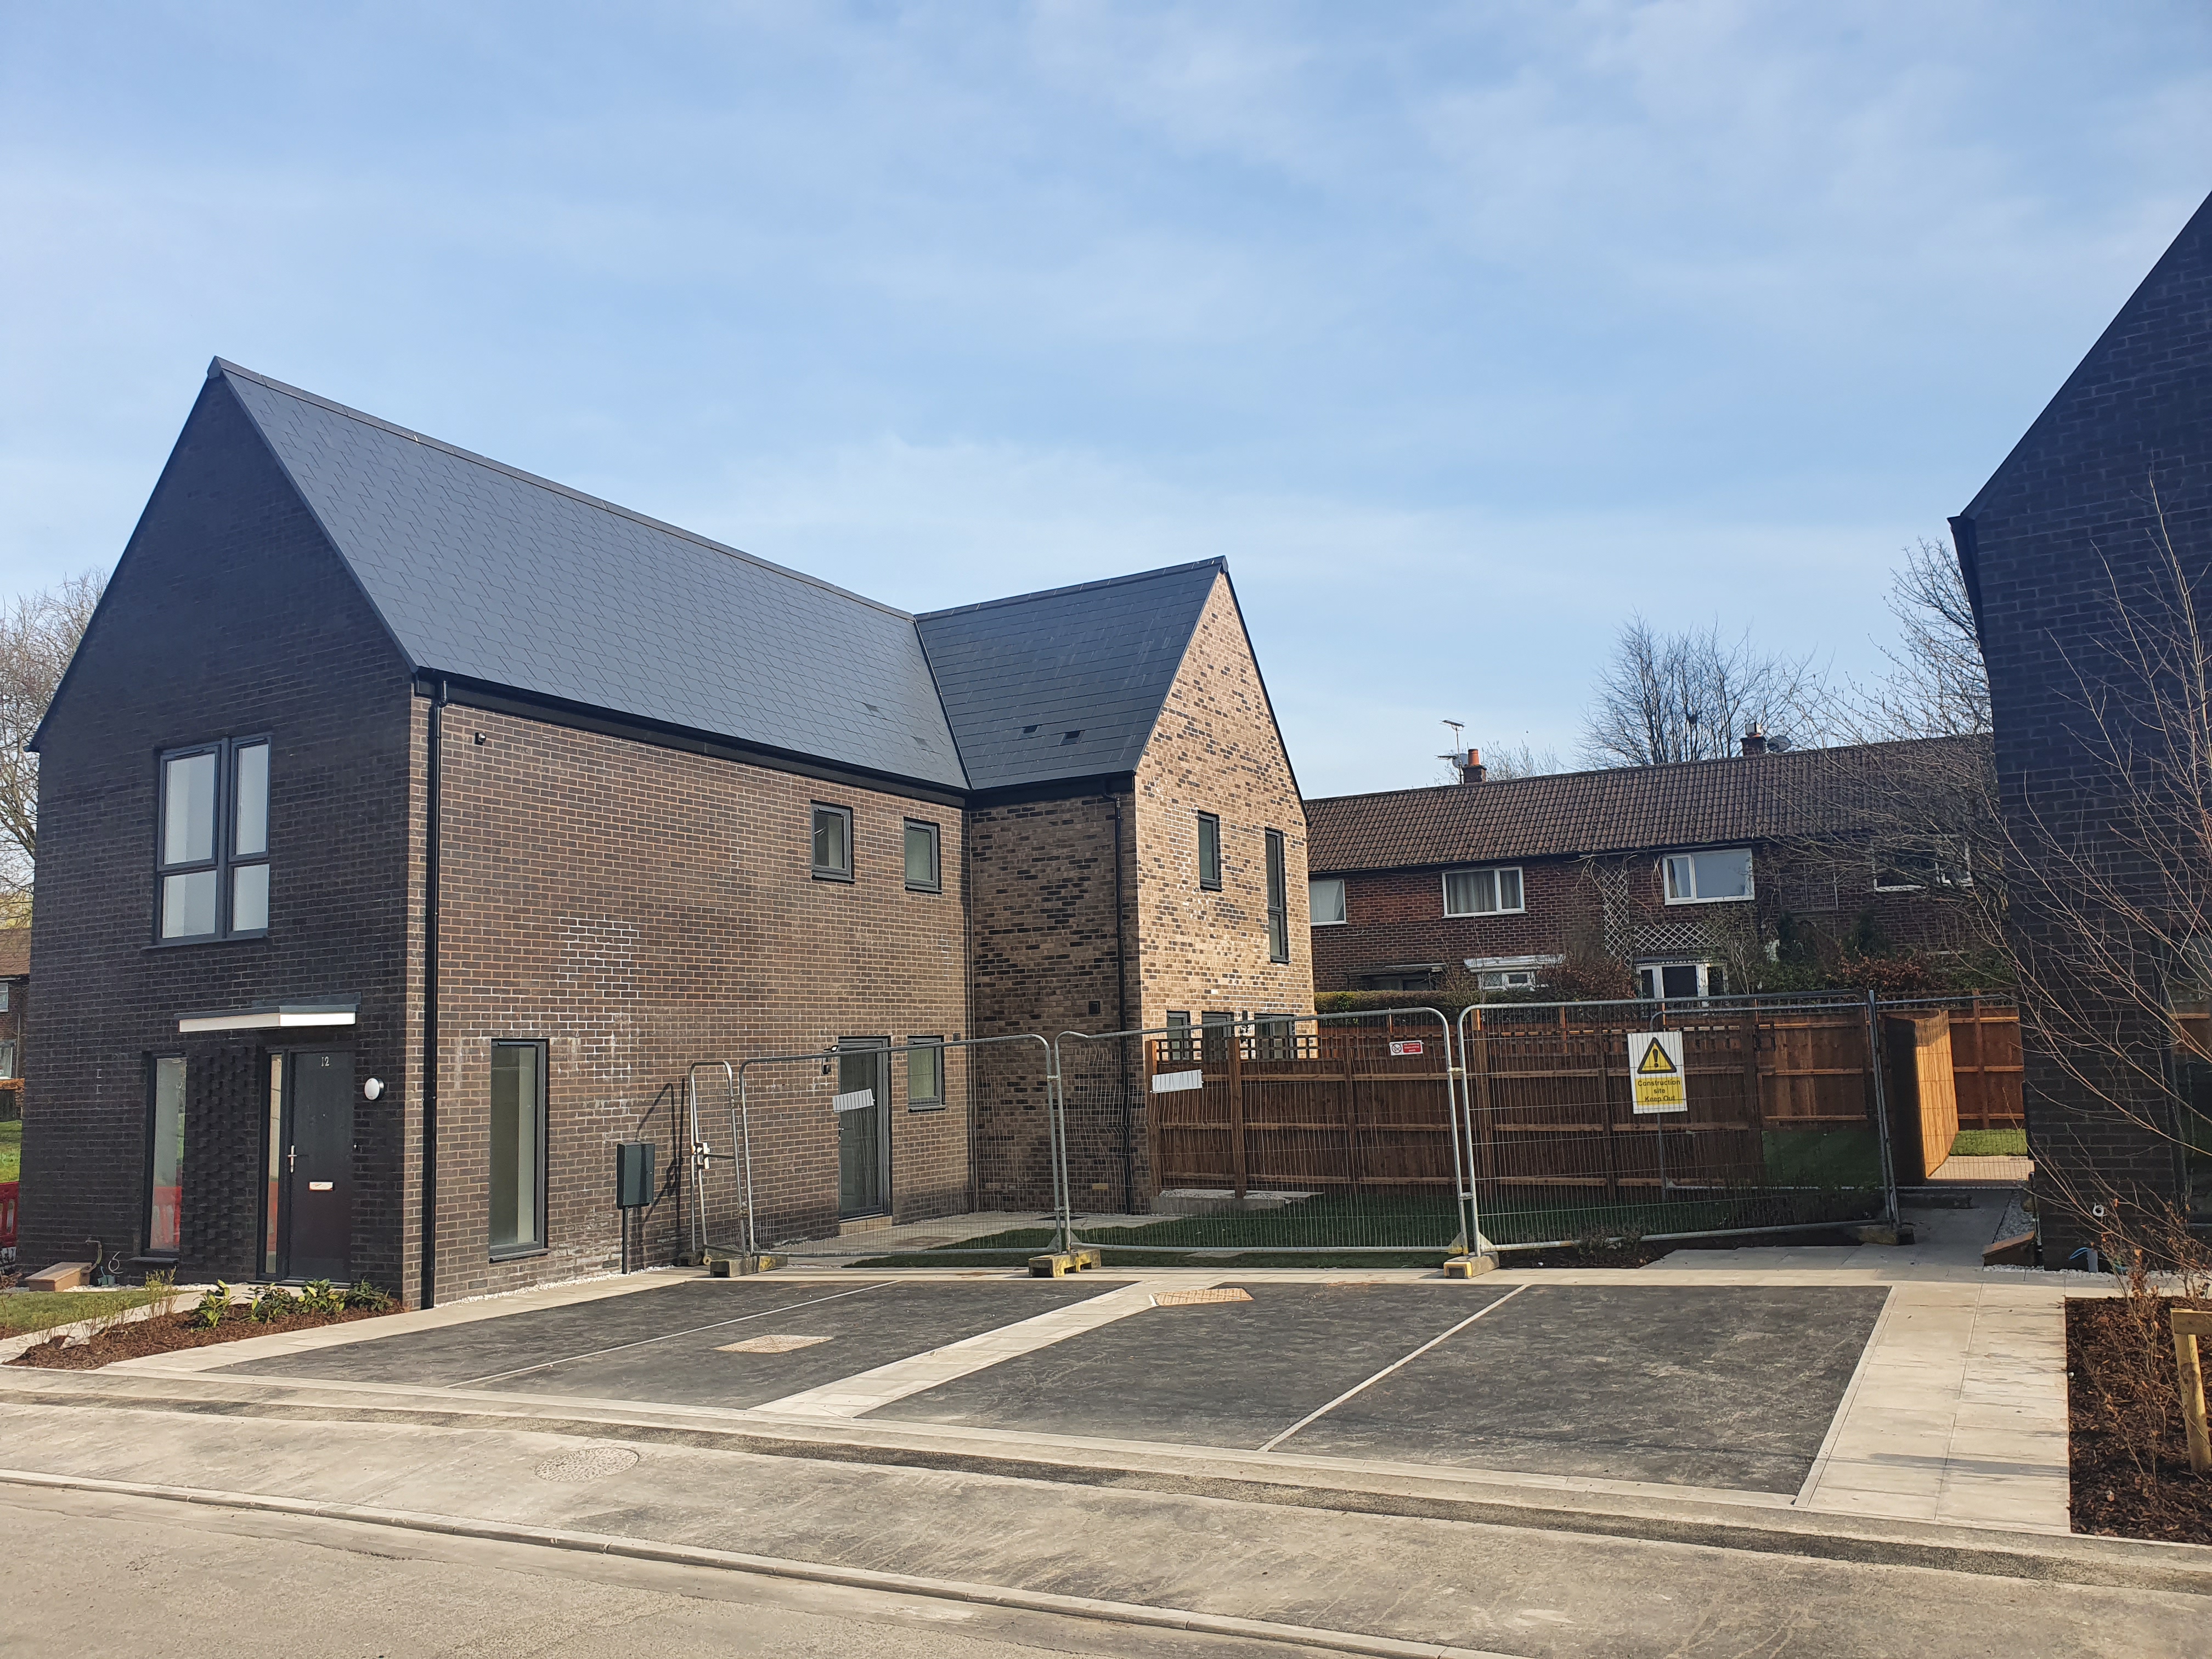 Six affordable homes in Hurdsfield